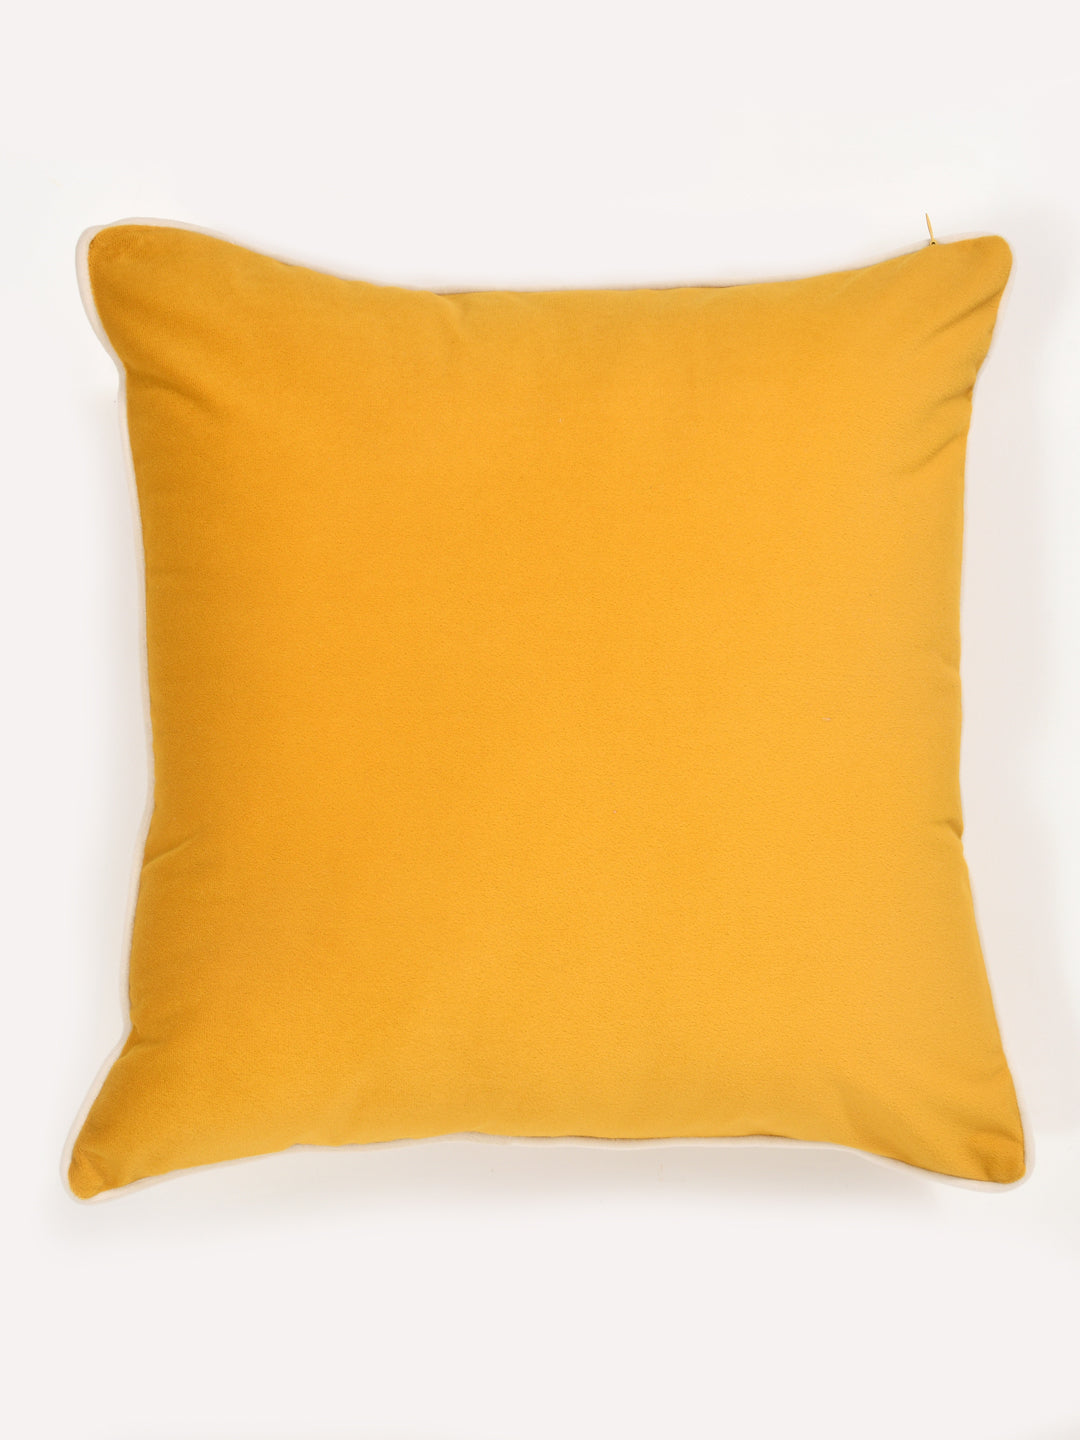 Velvet Cushion Covers; Set of 4; Amber Yellow With White Piping